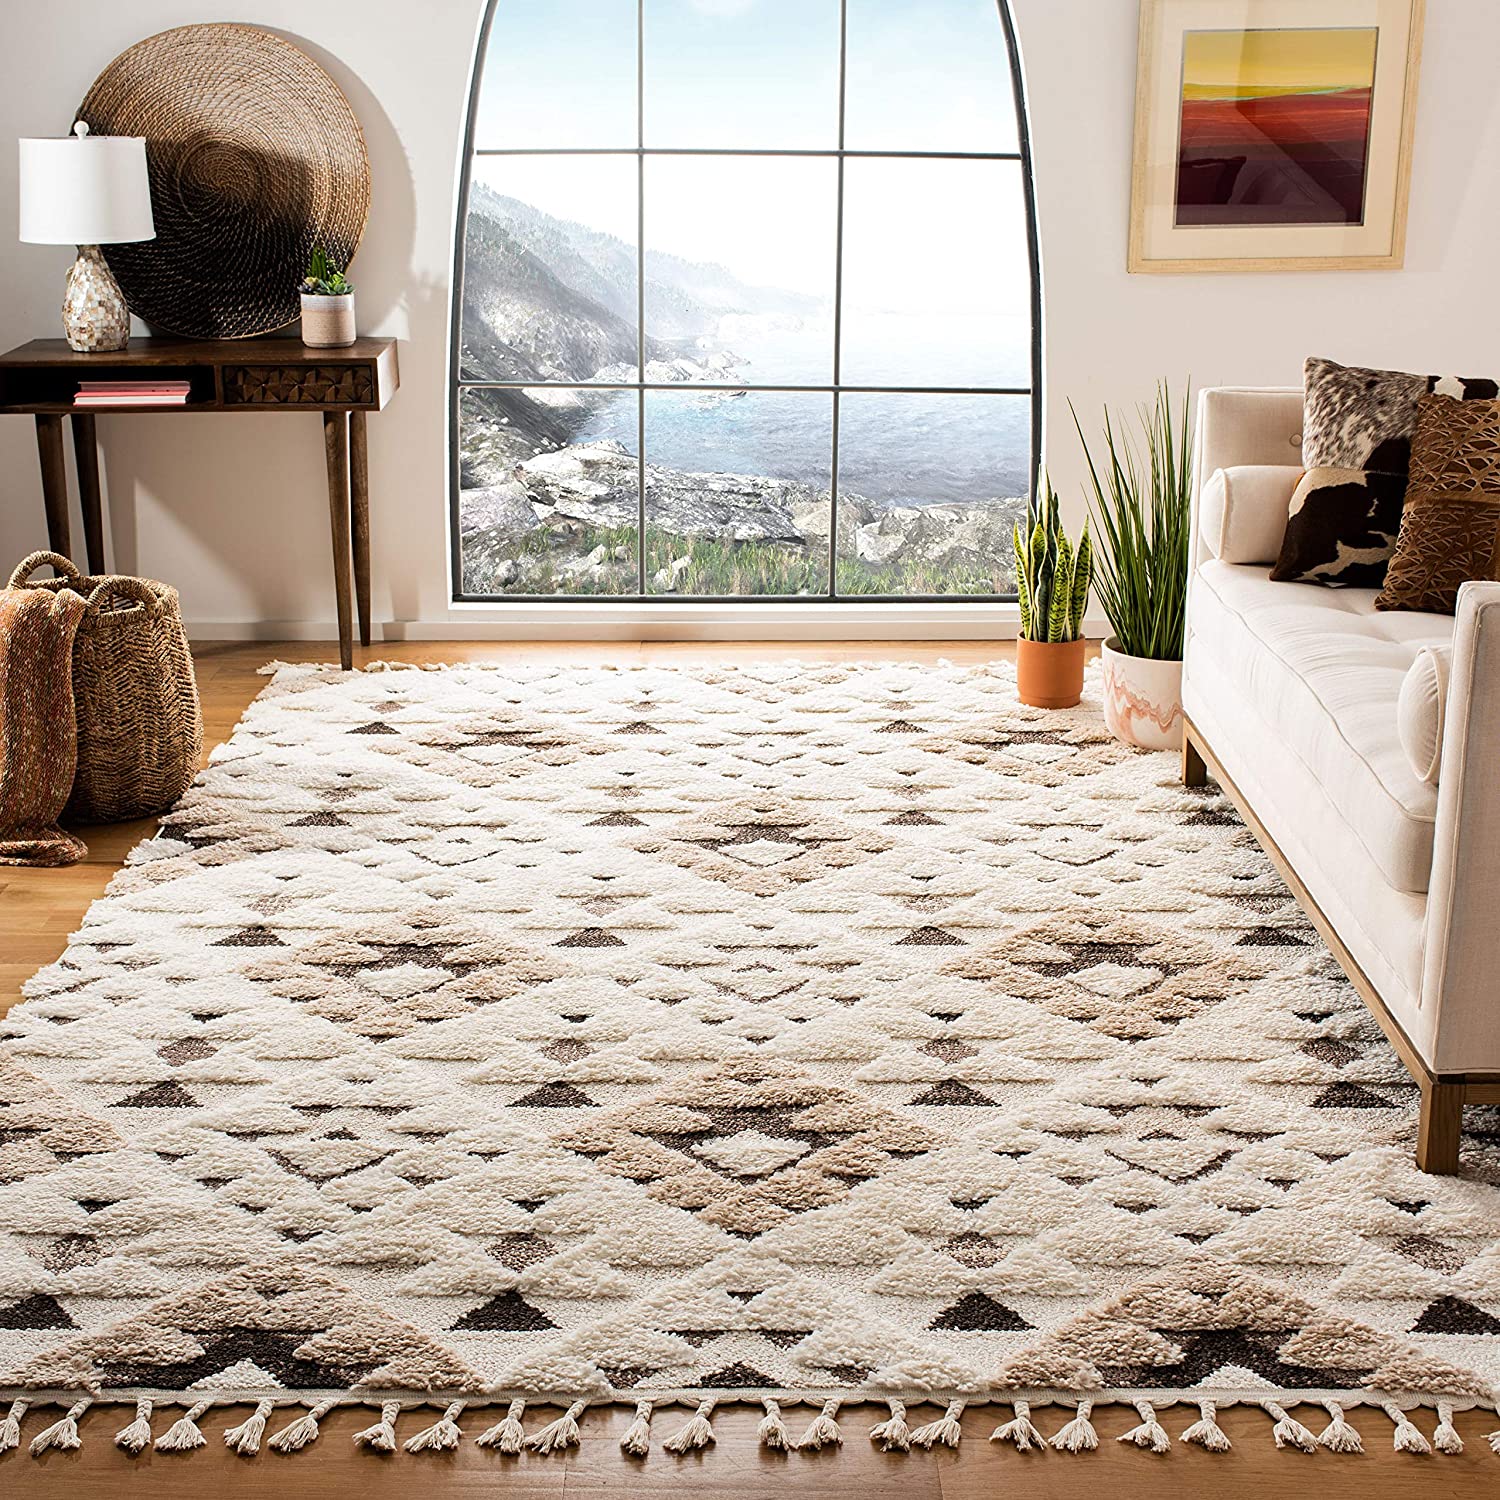  RUUGME Boho Rugs for Living Room 3 X 5,Super Soft Faux Rabbit  Fur Boho Area Rug,Washable and Stain Resistant Farmhouse Morrocan Rug,Thick  and No Smell Bohemian Decor Rugs (White, 3' x